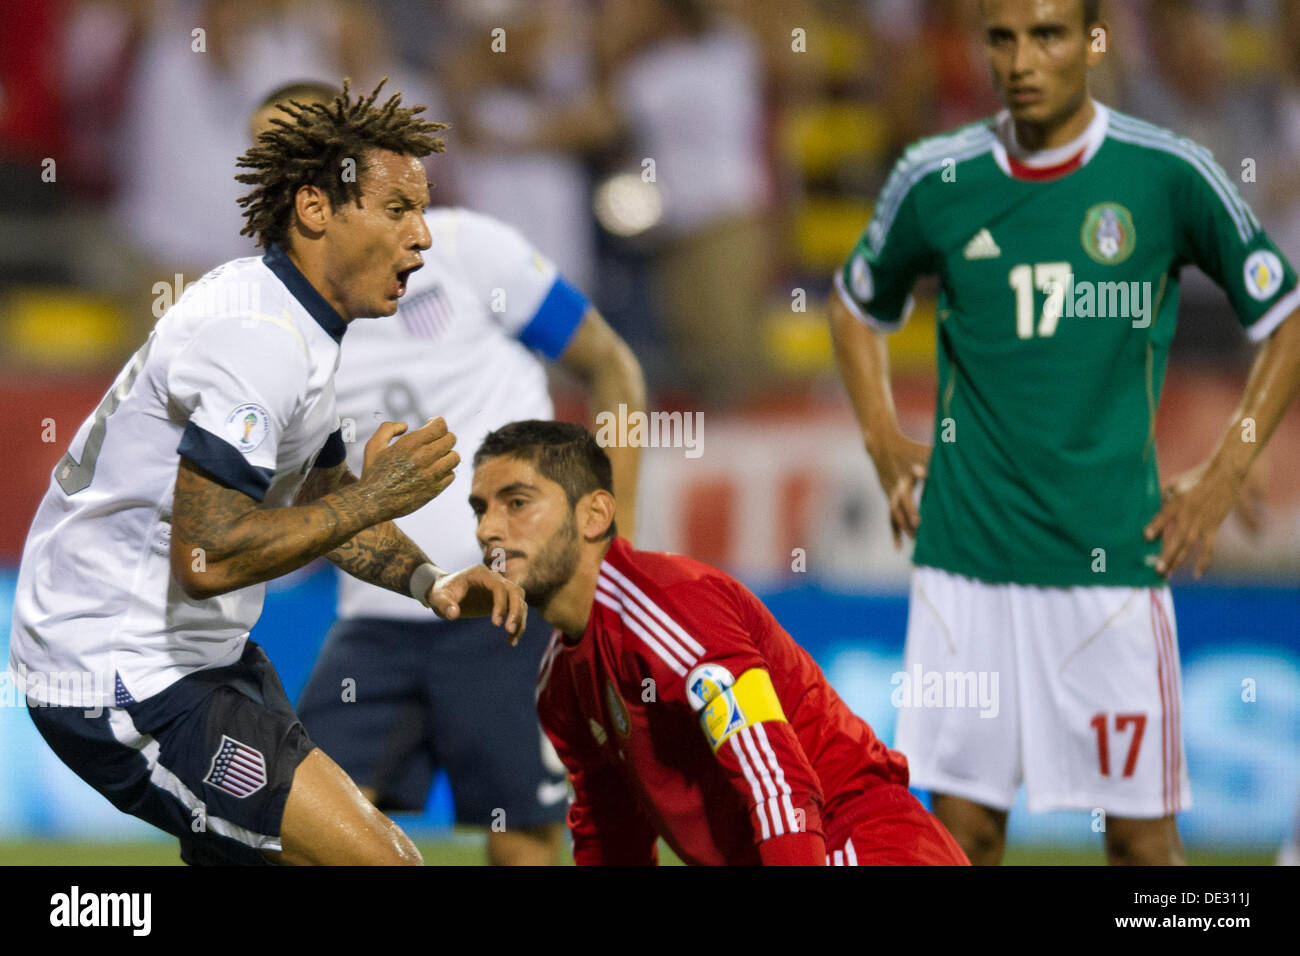 Columbus, Ohio, USA. 10th Sep, 2013. September 10, 2013: Mexico National Team goalkeeper Jose de Jesus Corona (1) is disappointed and Mexico National Team midfielder Jesus Zavala (17) looks on as US Men's National Team midfielder Jermaine Jones (13) celebrates after the first goal was scored during the U.S. Men's National Team vs. Mexico National Team- World Cup Qualifier match at Columbus Crew Stadium - Columbus, OH. The United States Men's National Team defeated The Mexico National Team 2-0 and clinched a spot for the World Cup in Brazil. Credit:  csm/Alamy Live News Stock Photo